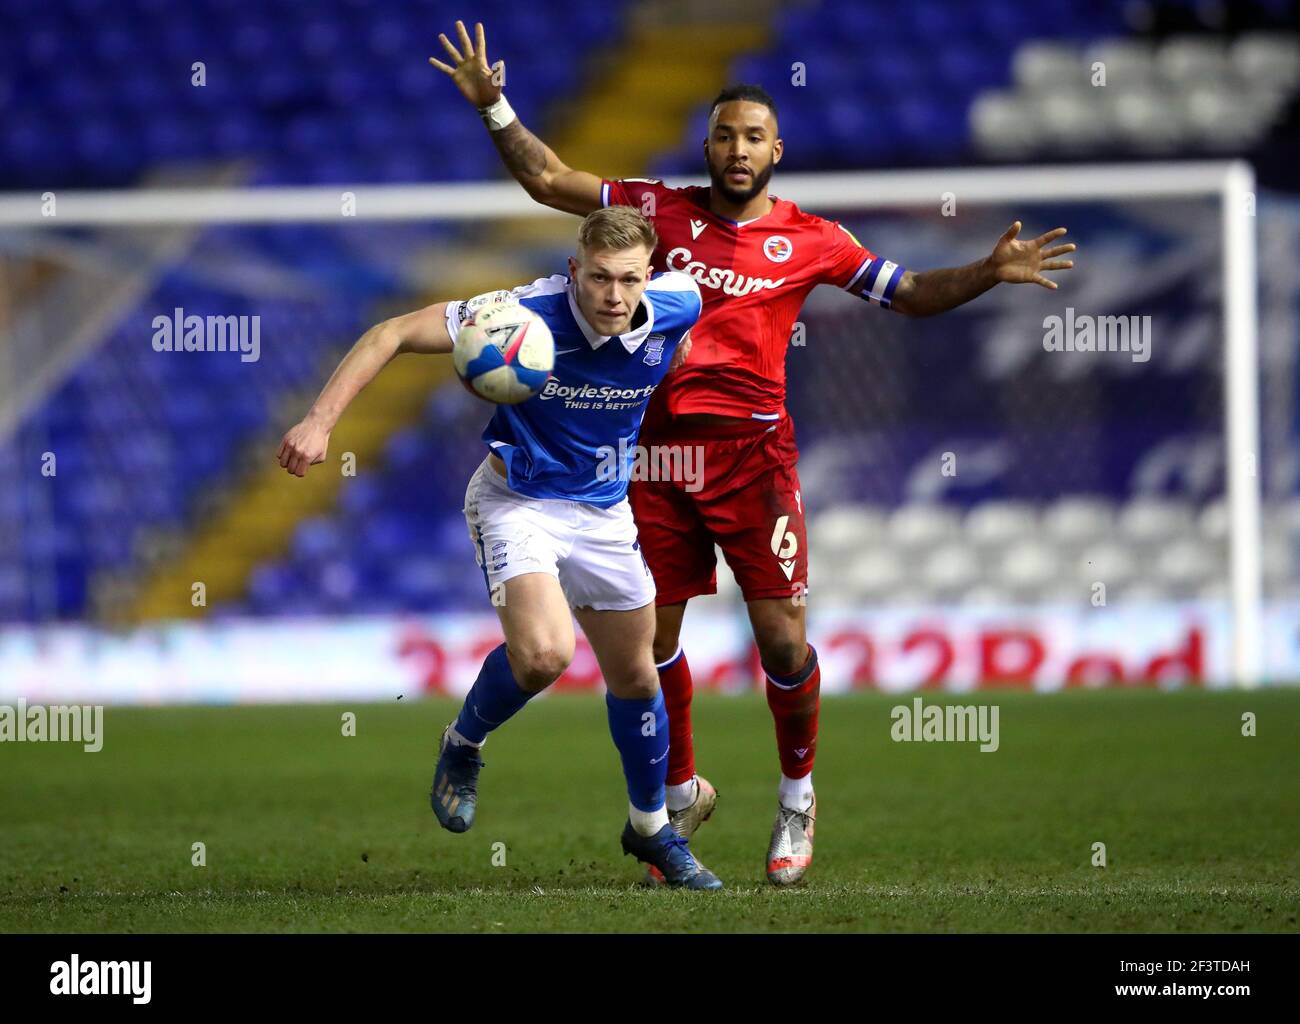 Birmingham City's Sam Cosgrove (left) and Reading's Liam Moore battle for the ball during the Sky Bet Championship match at St Andrew's Trillion Trophy Stadium, Birmingham. Picture date: Wednesday March 17, 2021. Stock Photo